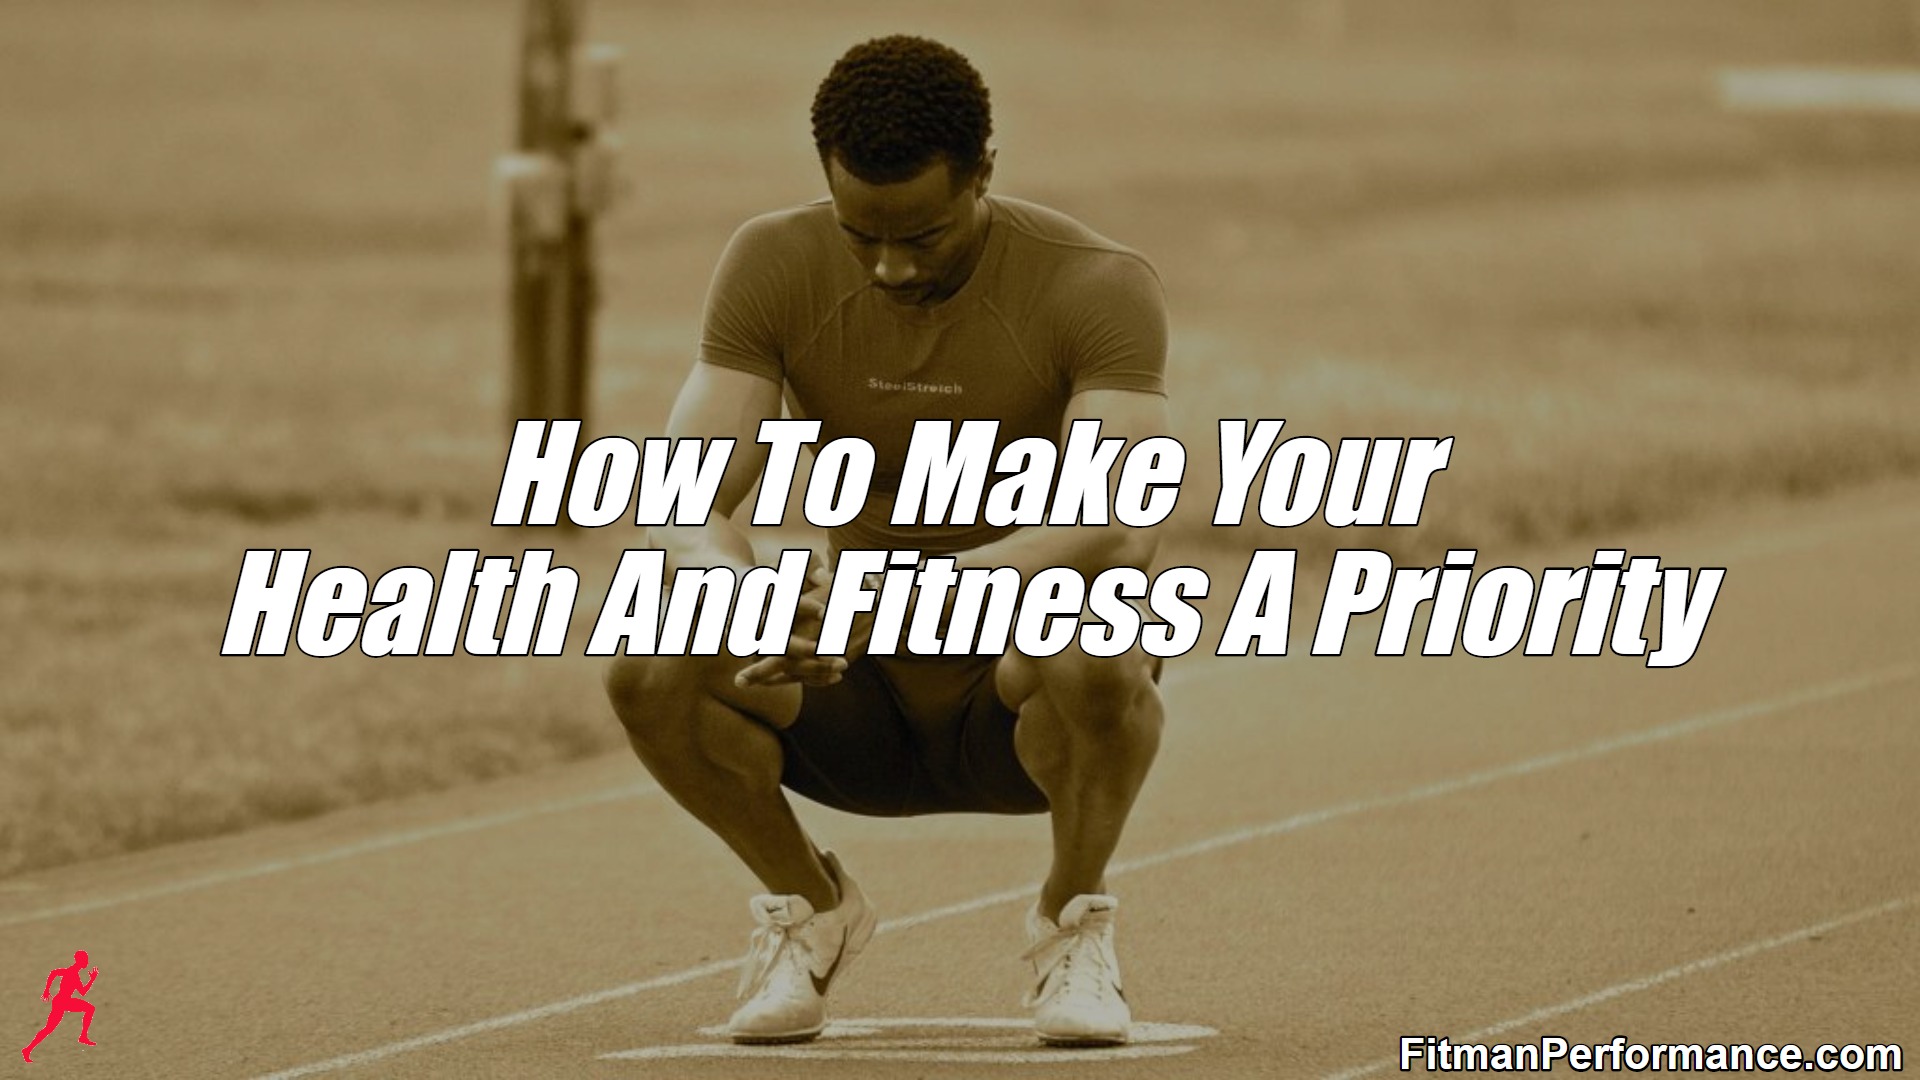 How To Make Your Health And Fitness A Priority